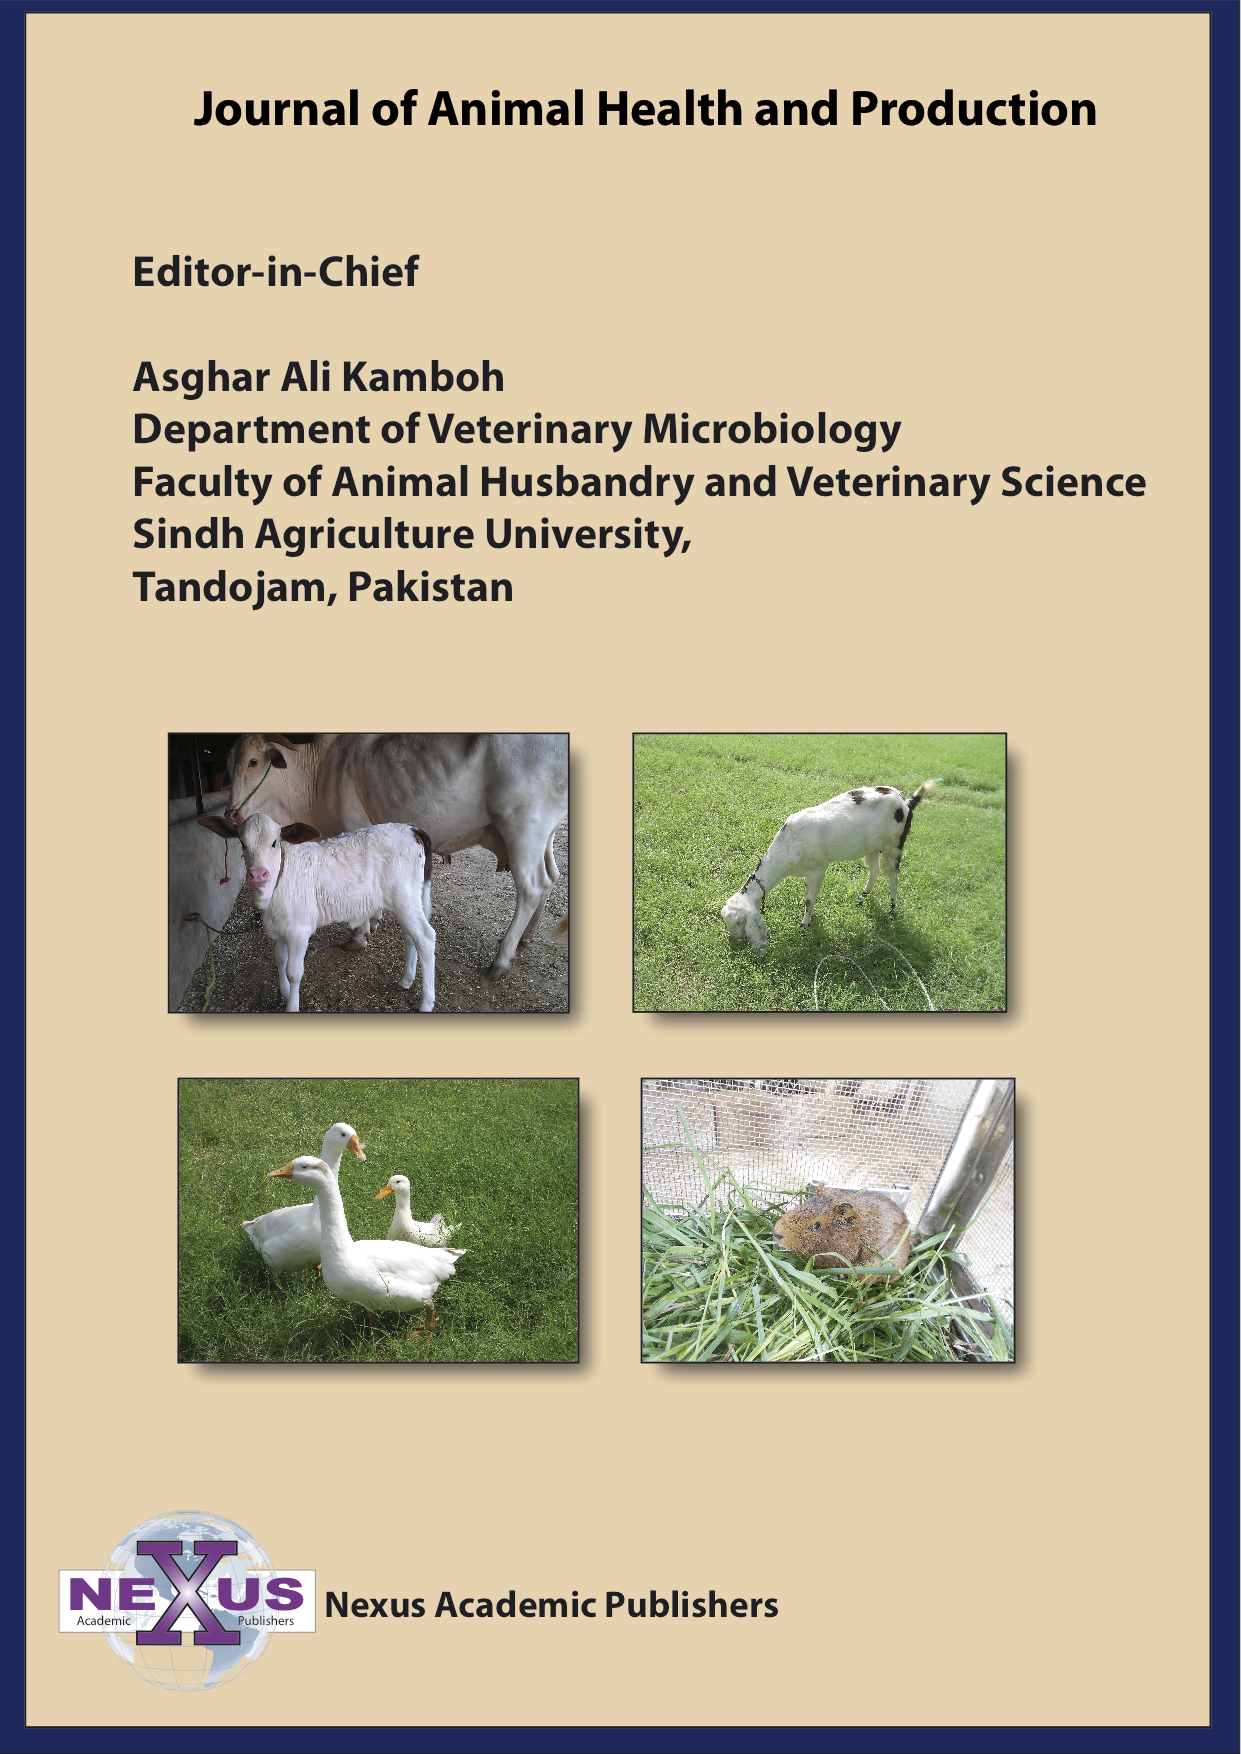 Journal of Animal Health and Production